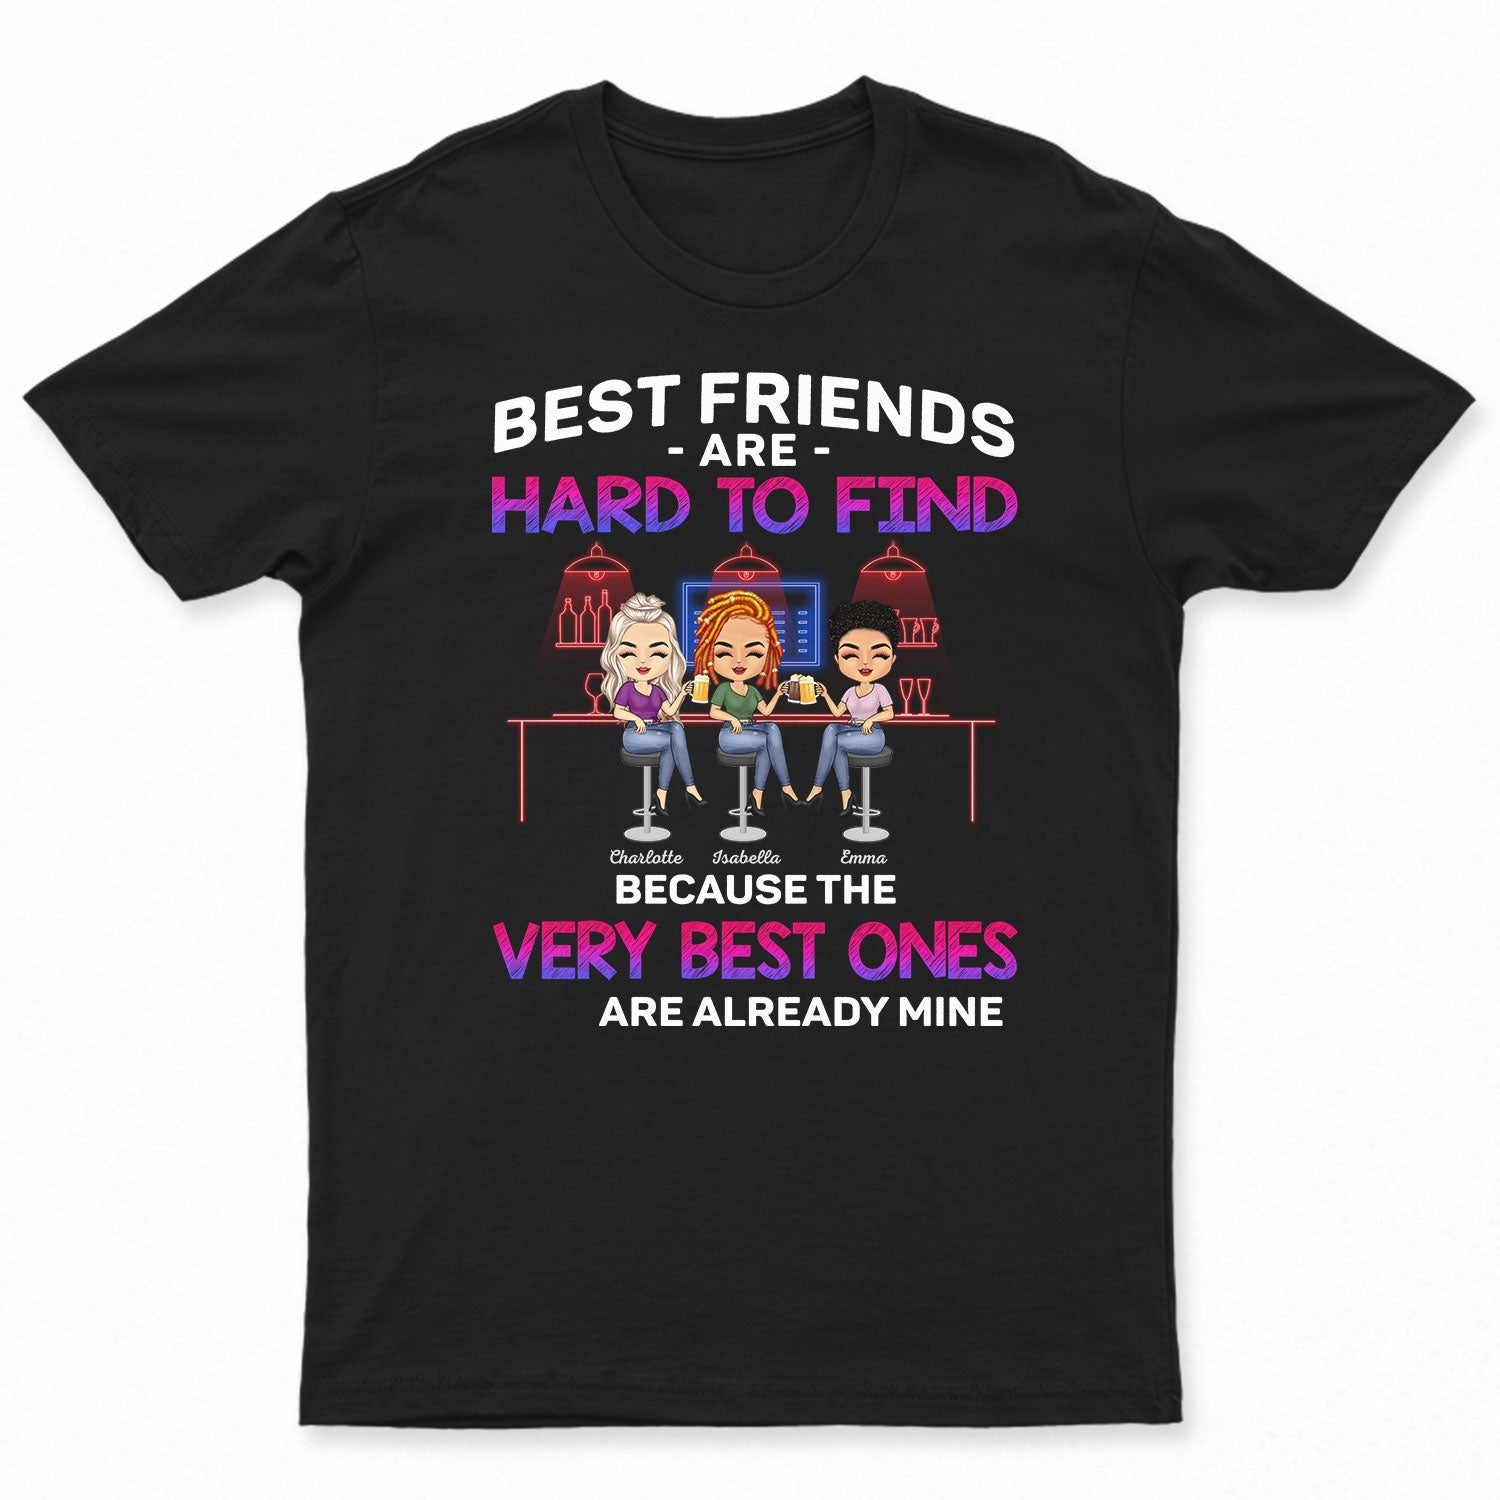 Best Friends Are Hard To Find Because The Very Best Is Already Mine - Birthday Gifts For Friends, Besties, Soul Sisters, BFF - Personalized Custom T Shirt